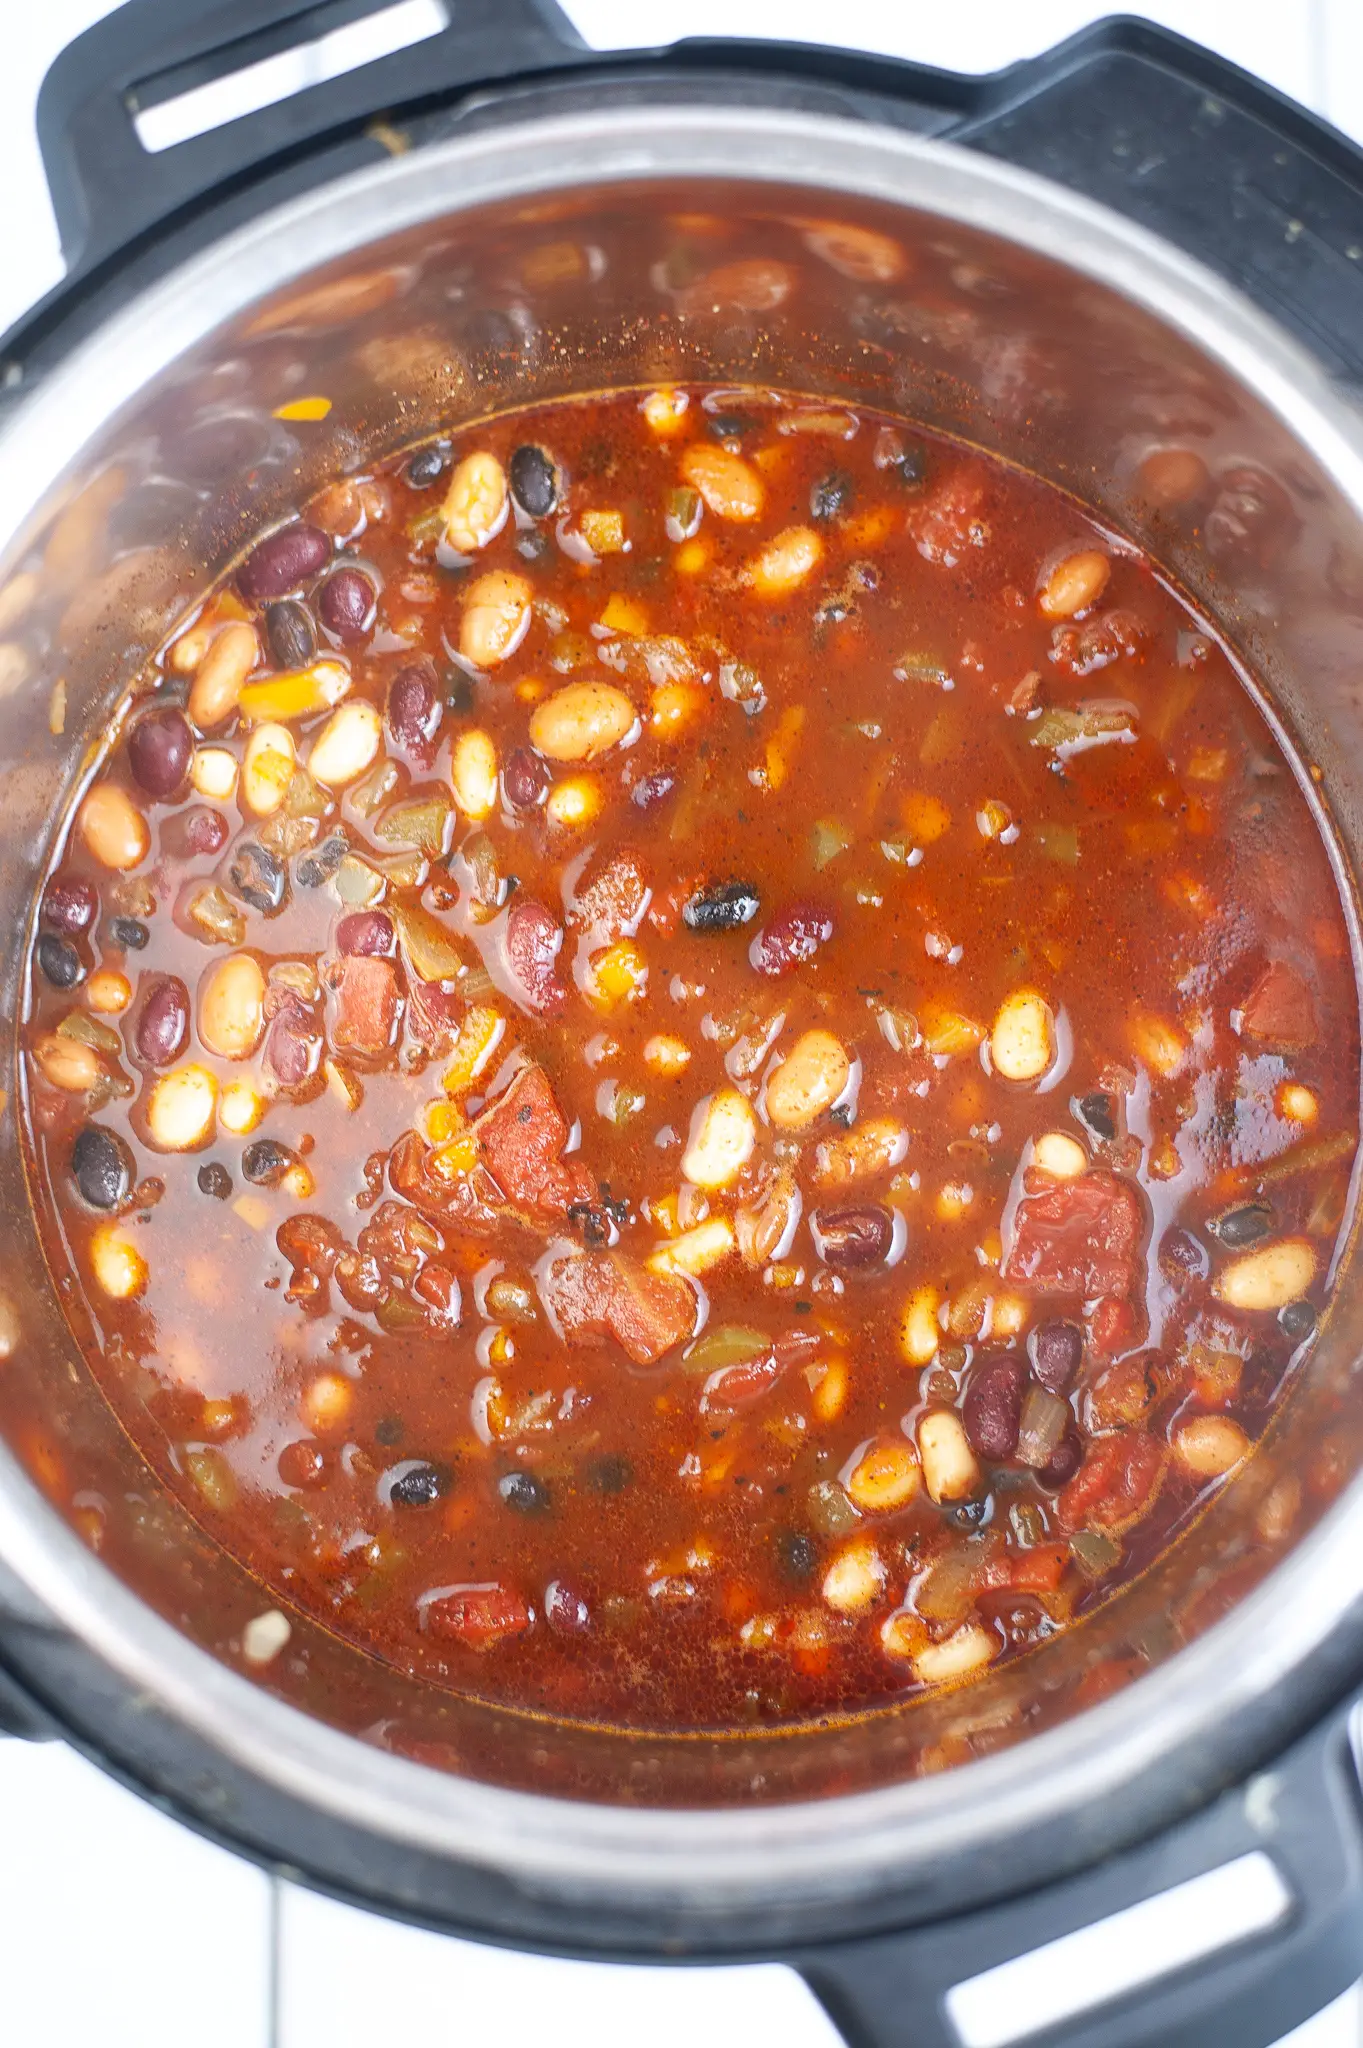 Instant Pot Vegetarian Chili in Instant Pot cooked.